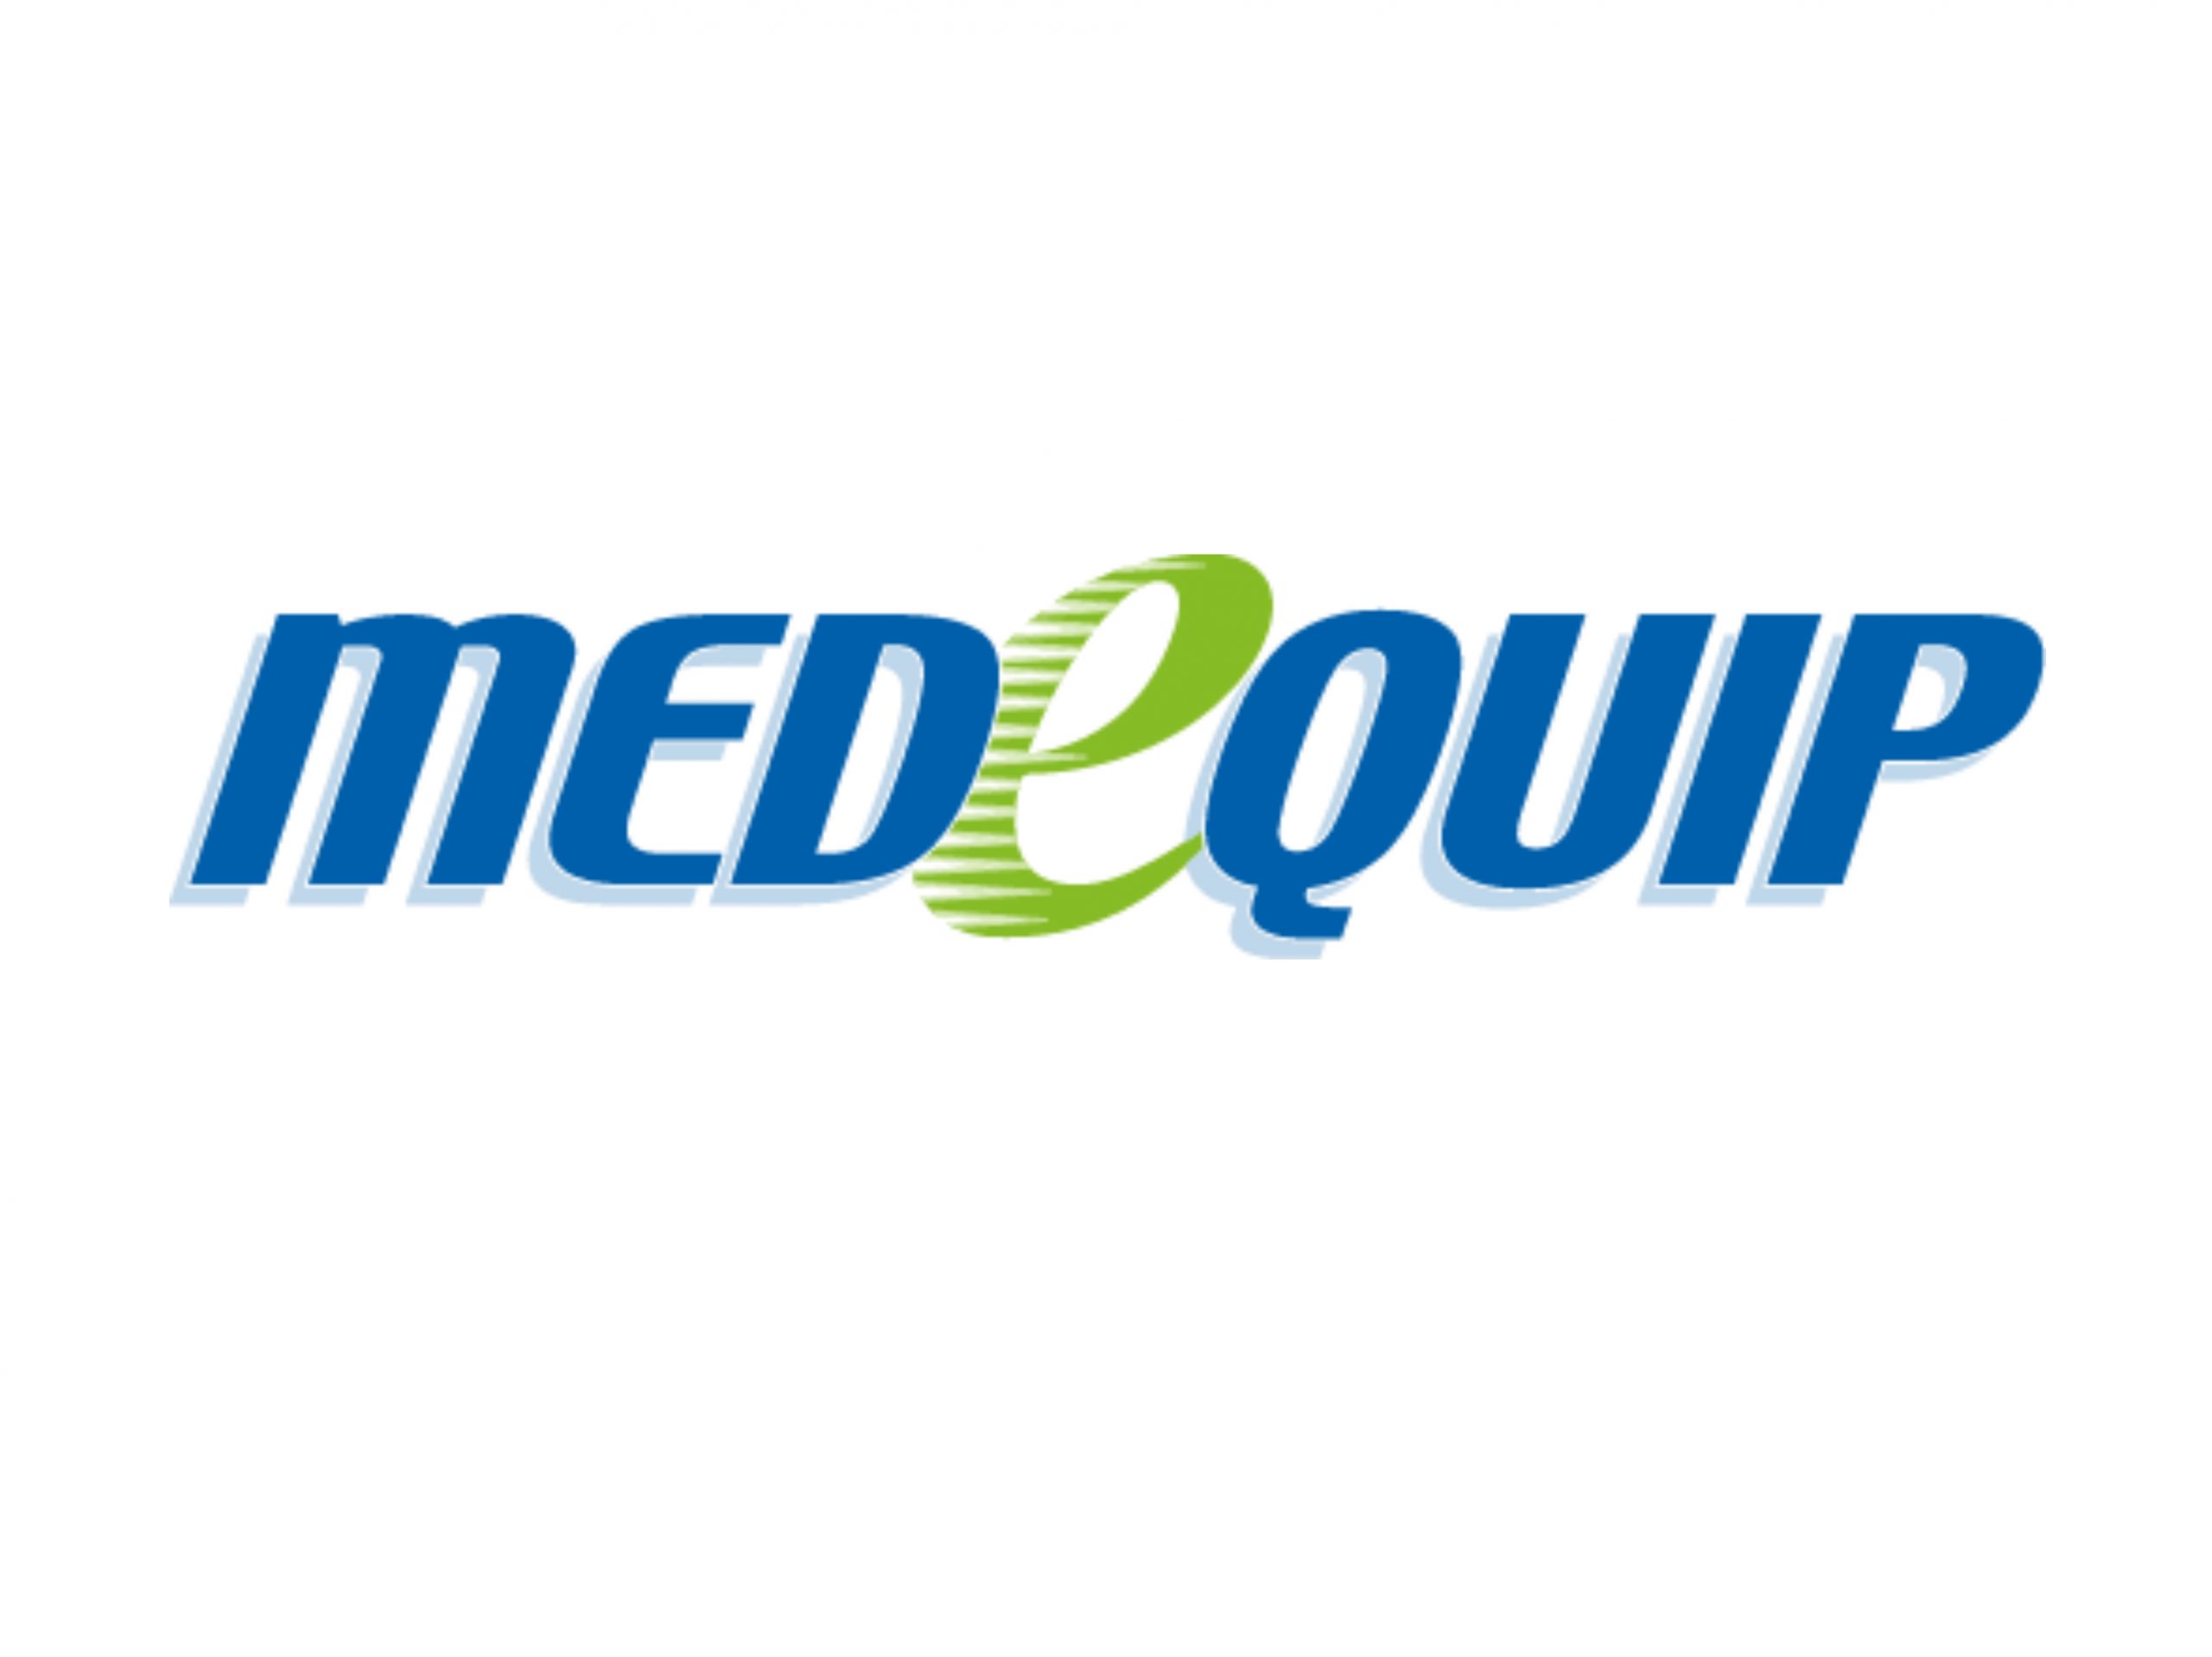 Medequip invests in cleaner technology for London